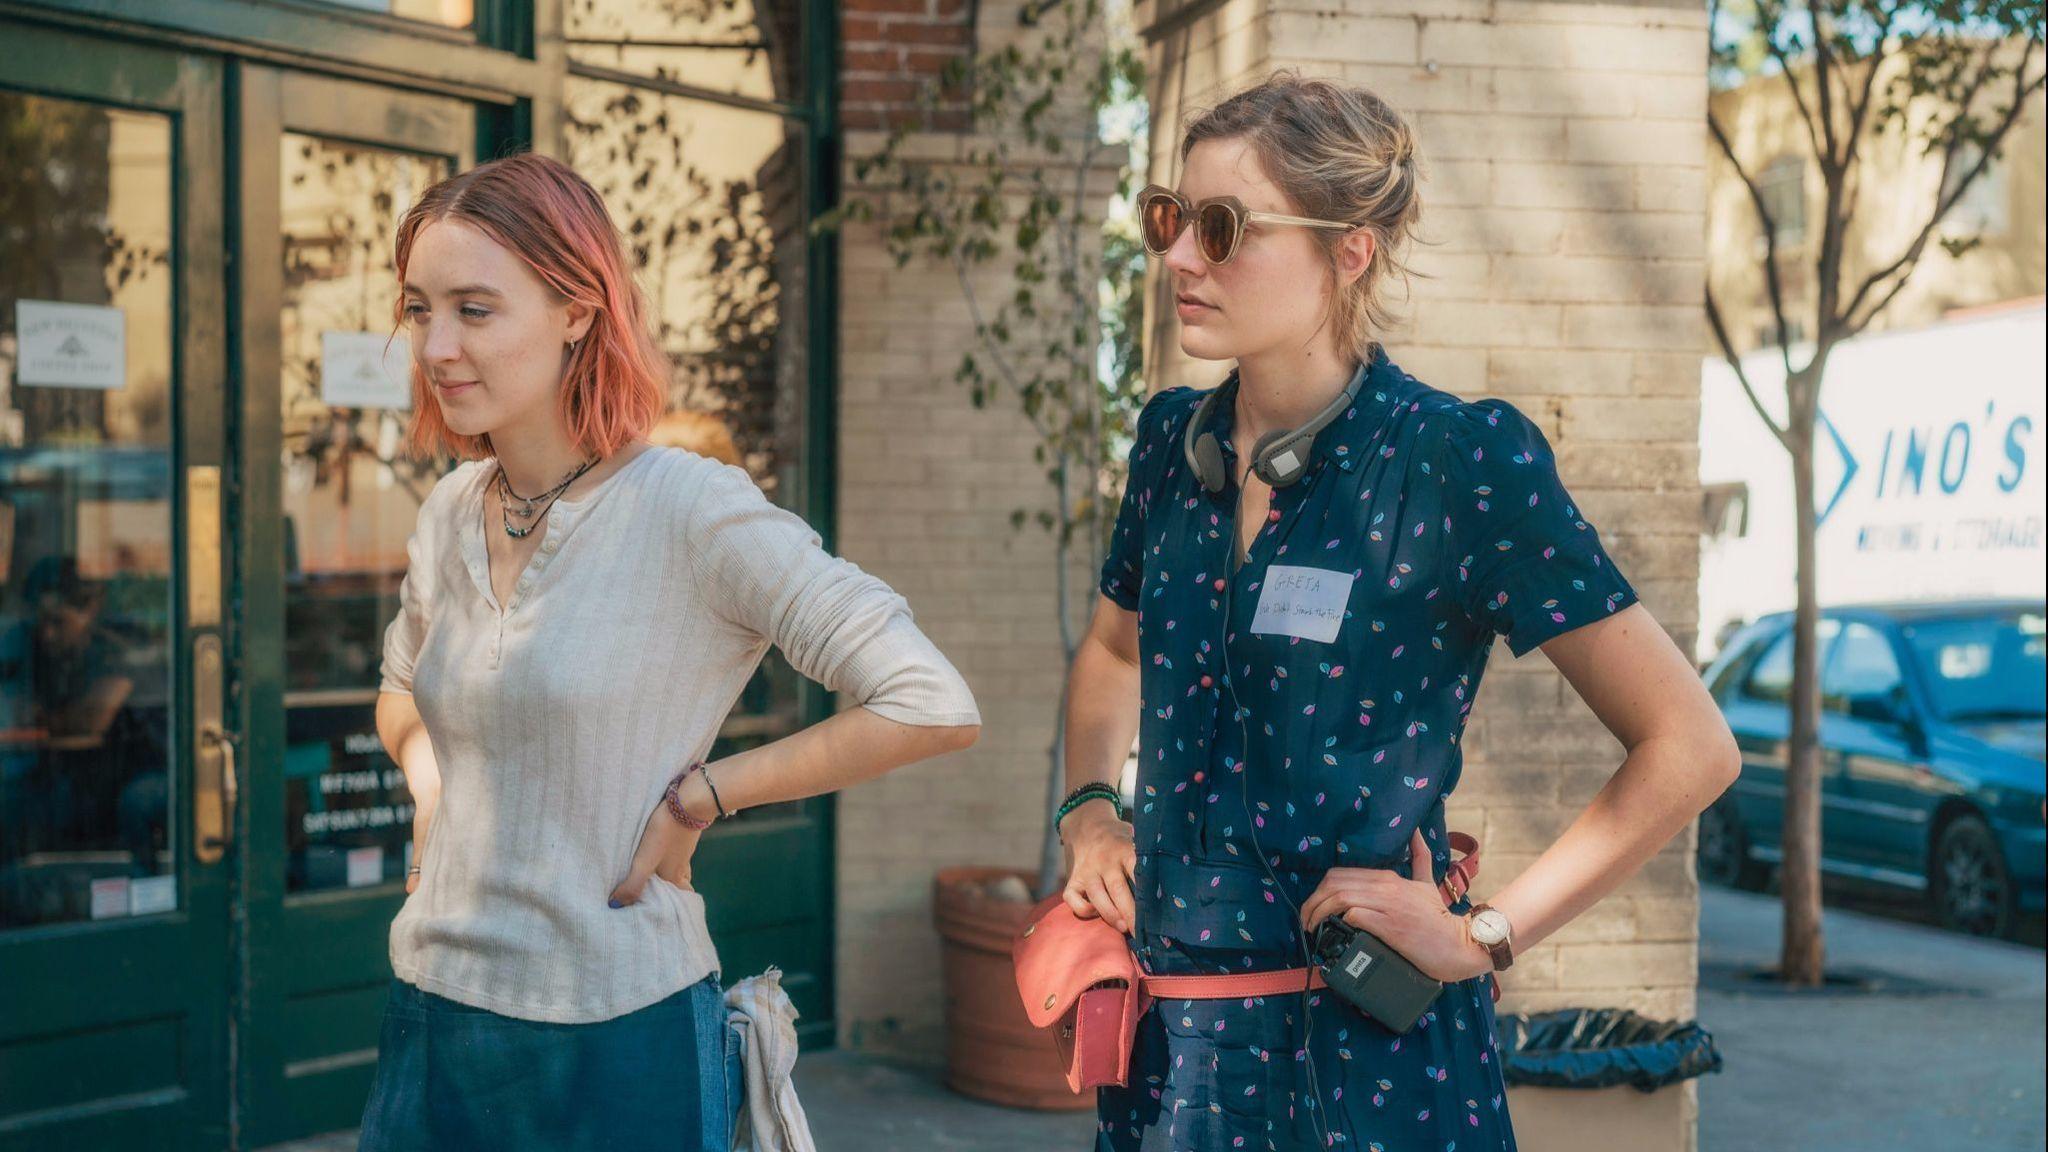 Greta Gerwig talks about her directorial debut and casting Saoirse